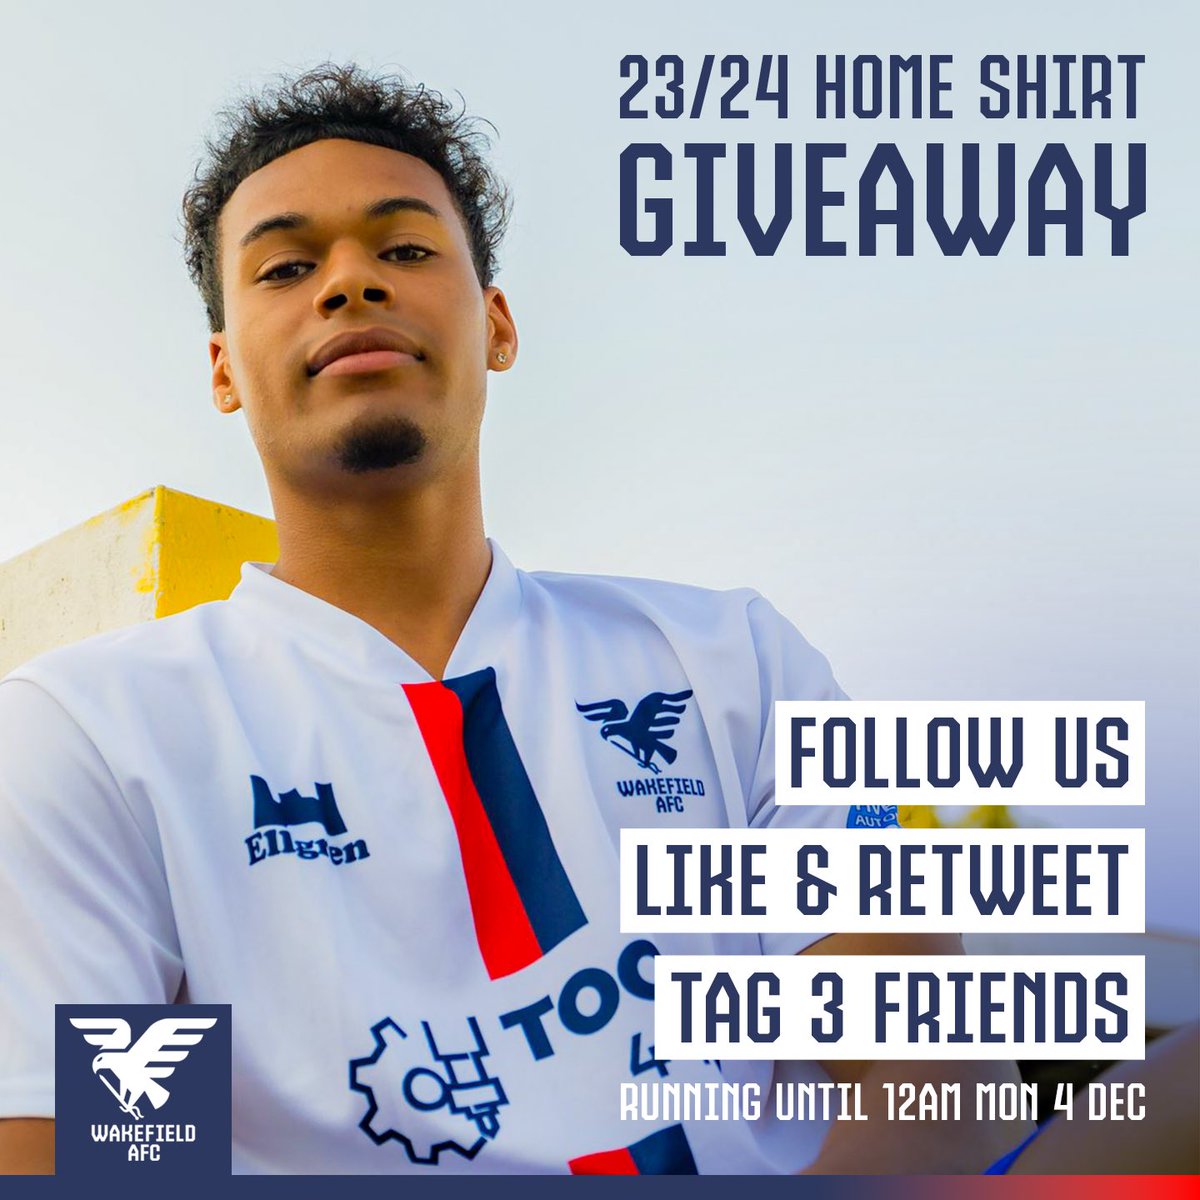 🎁 | It’s giveaway time! We’re giving one lucky follower the chance to win our beautiful 2023/24 home shirt! To enter simply: • Follow us here at @Wakefield_AFC • Like & RT this post • Tag 3 friends in the comments Entrants must do all three steps. Let’s go Falcons! 🦅